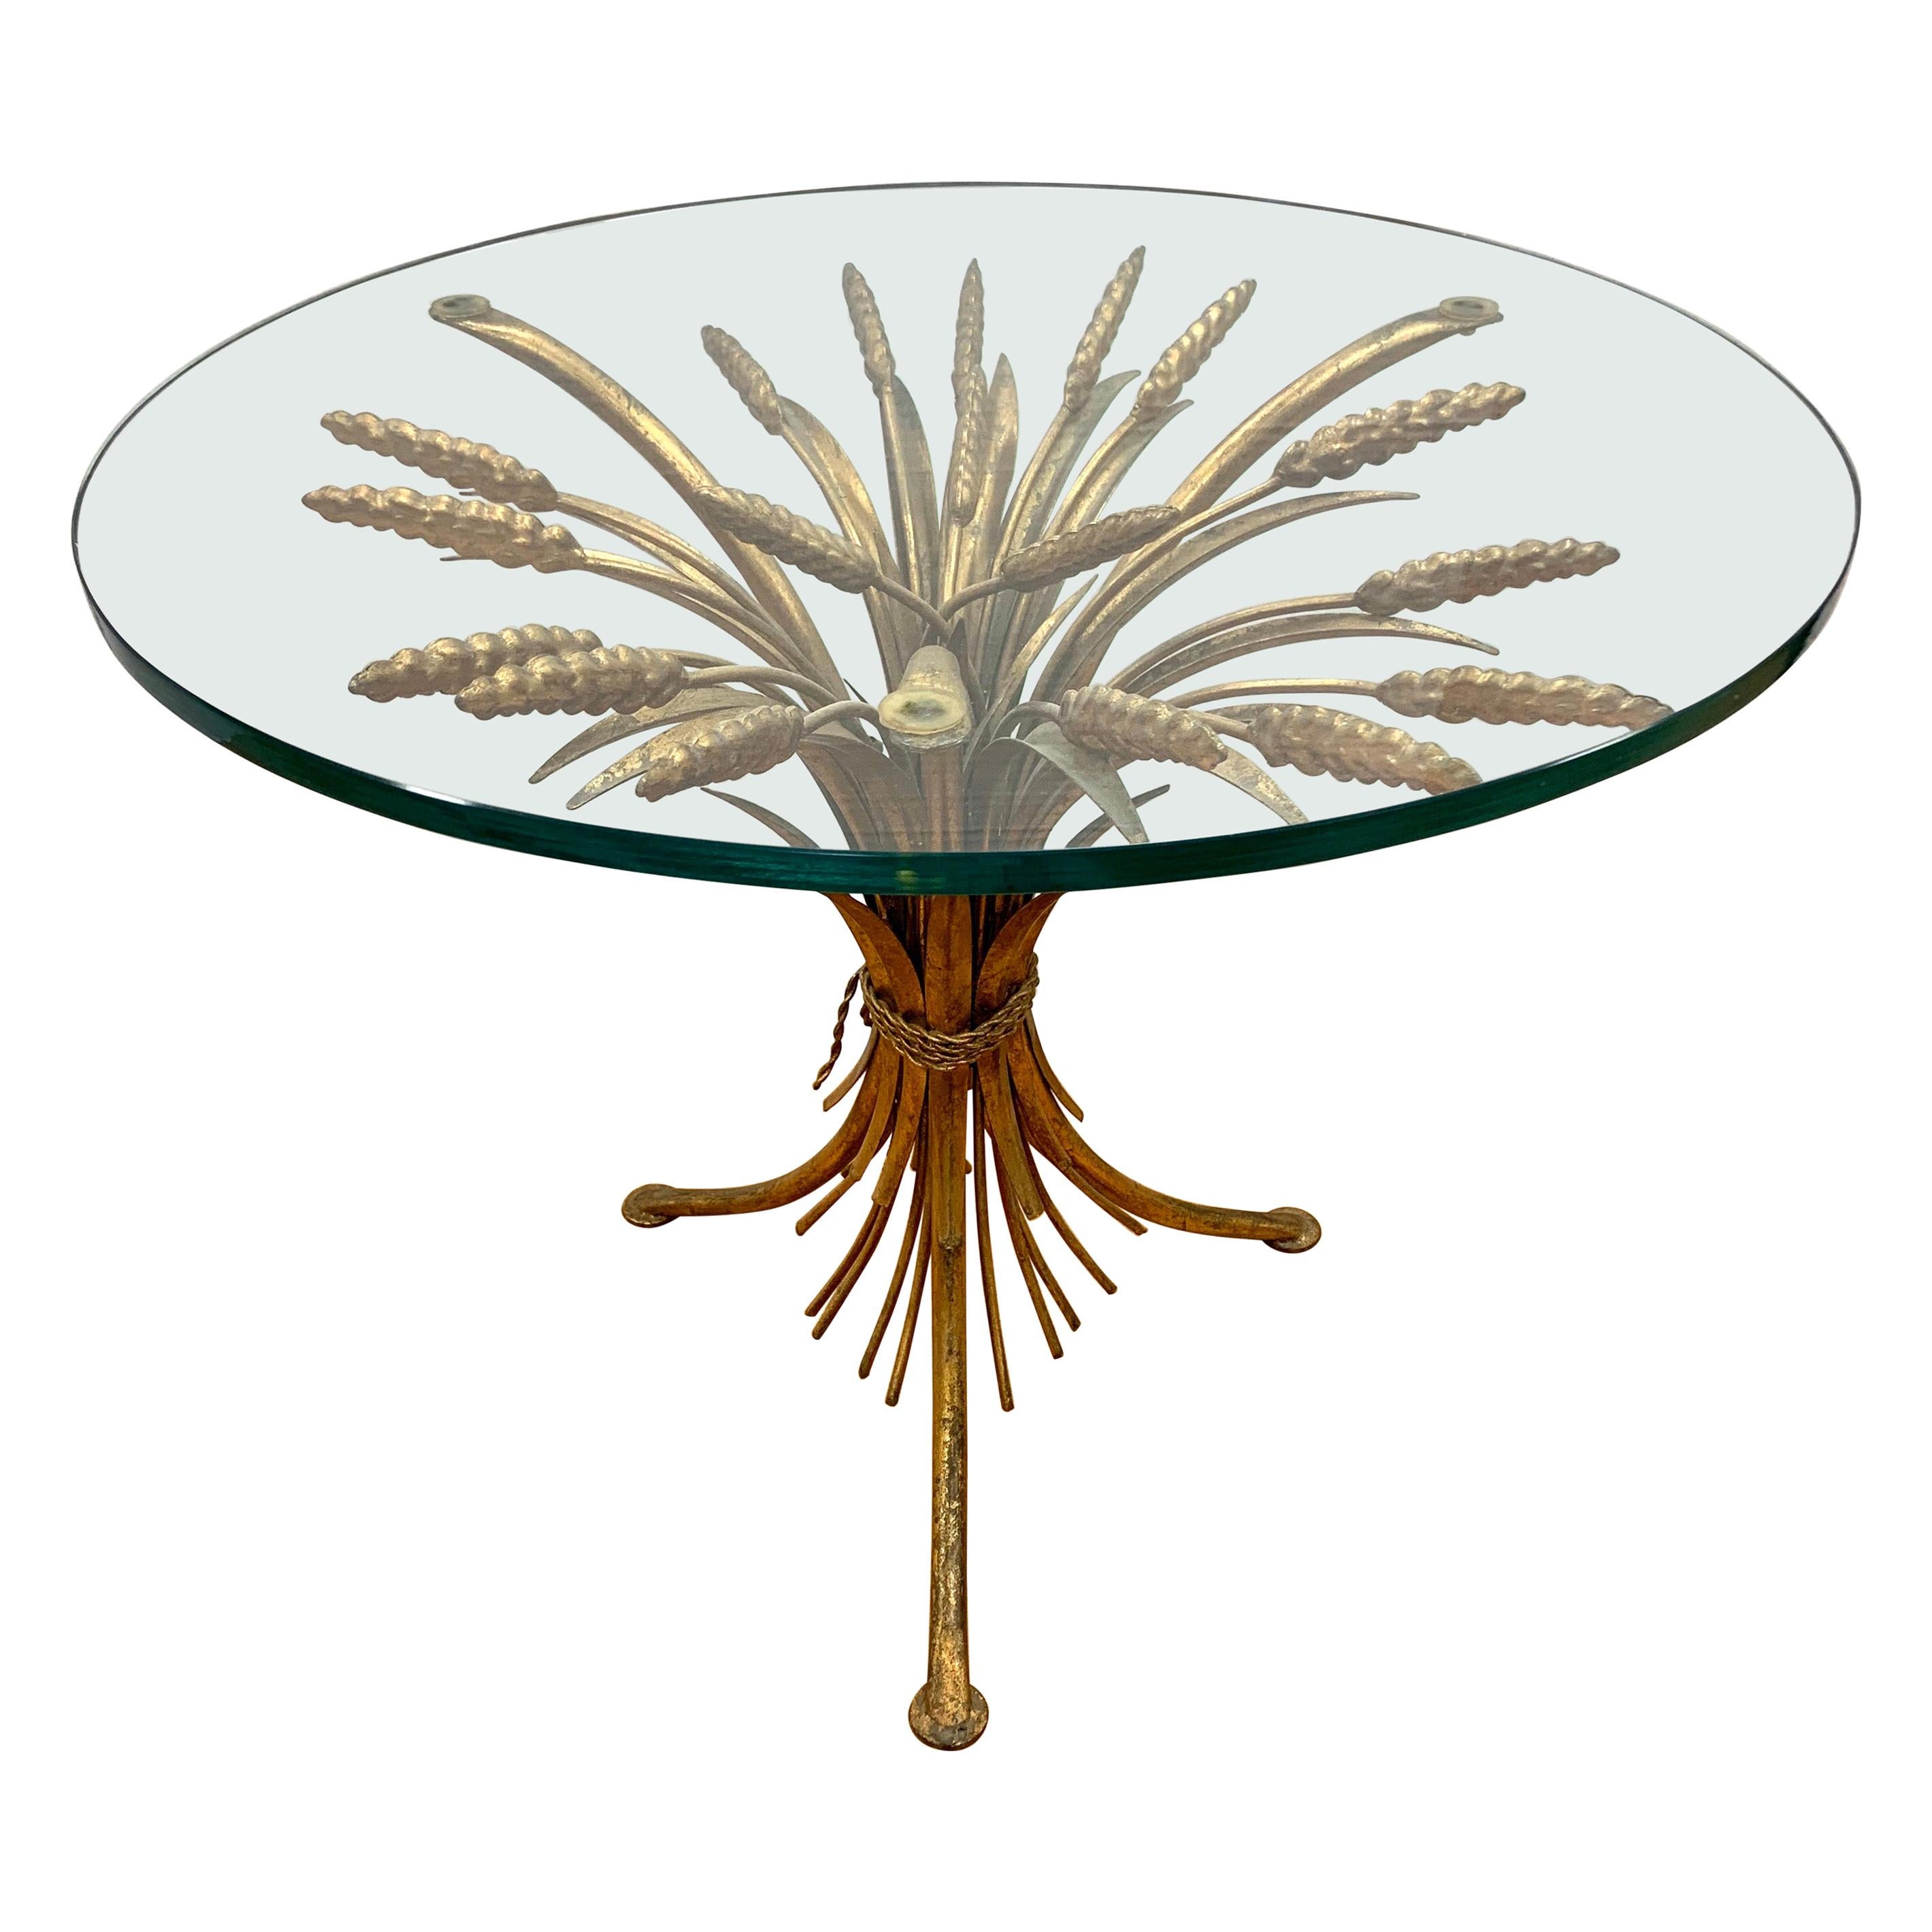 Midcentury Gold Gilt Wheat Sheath Table with Glass Top